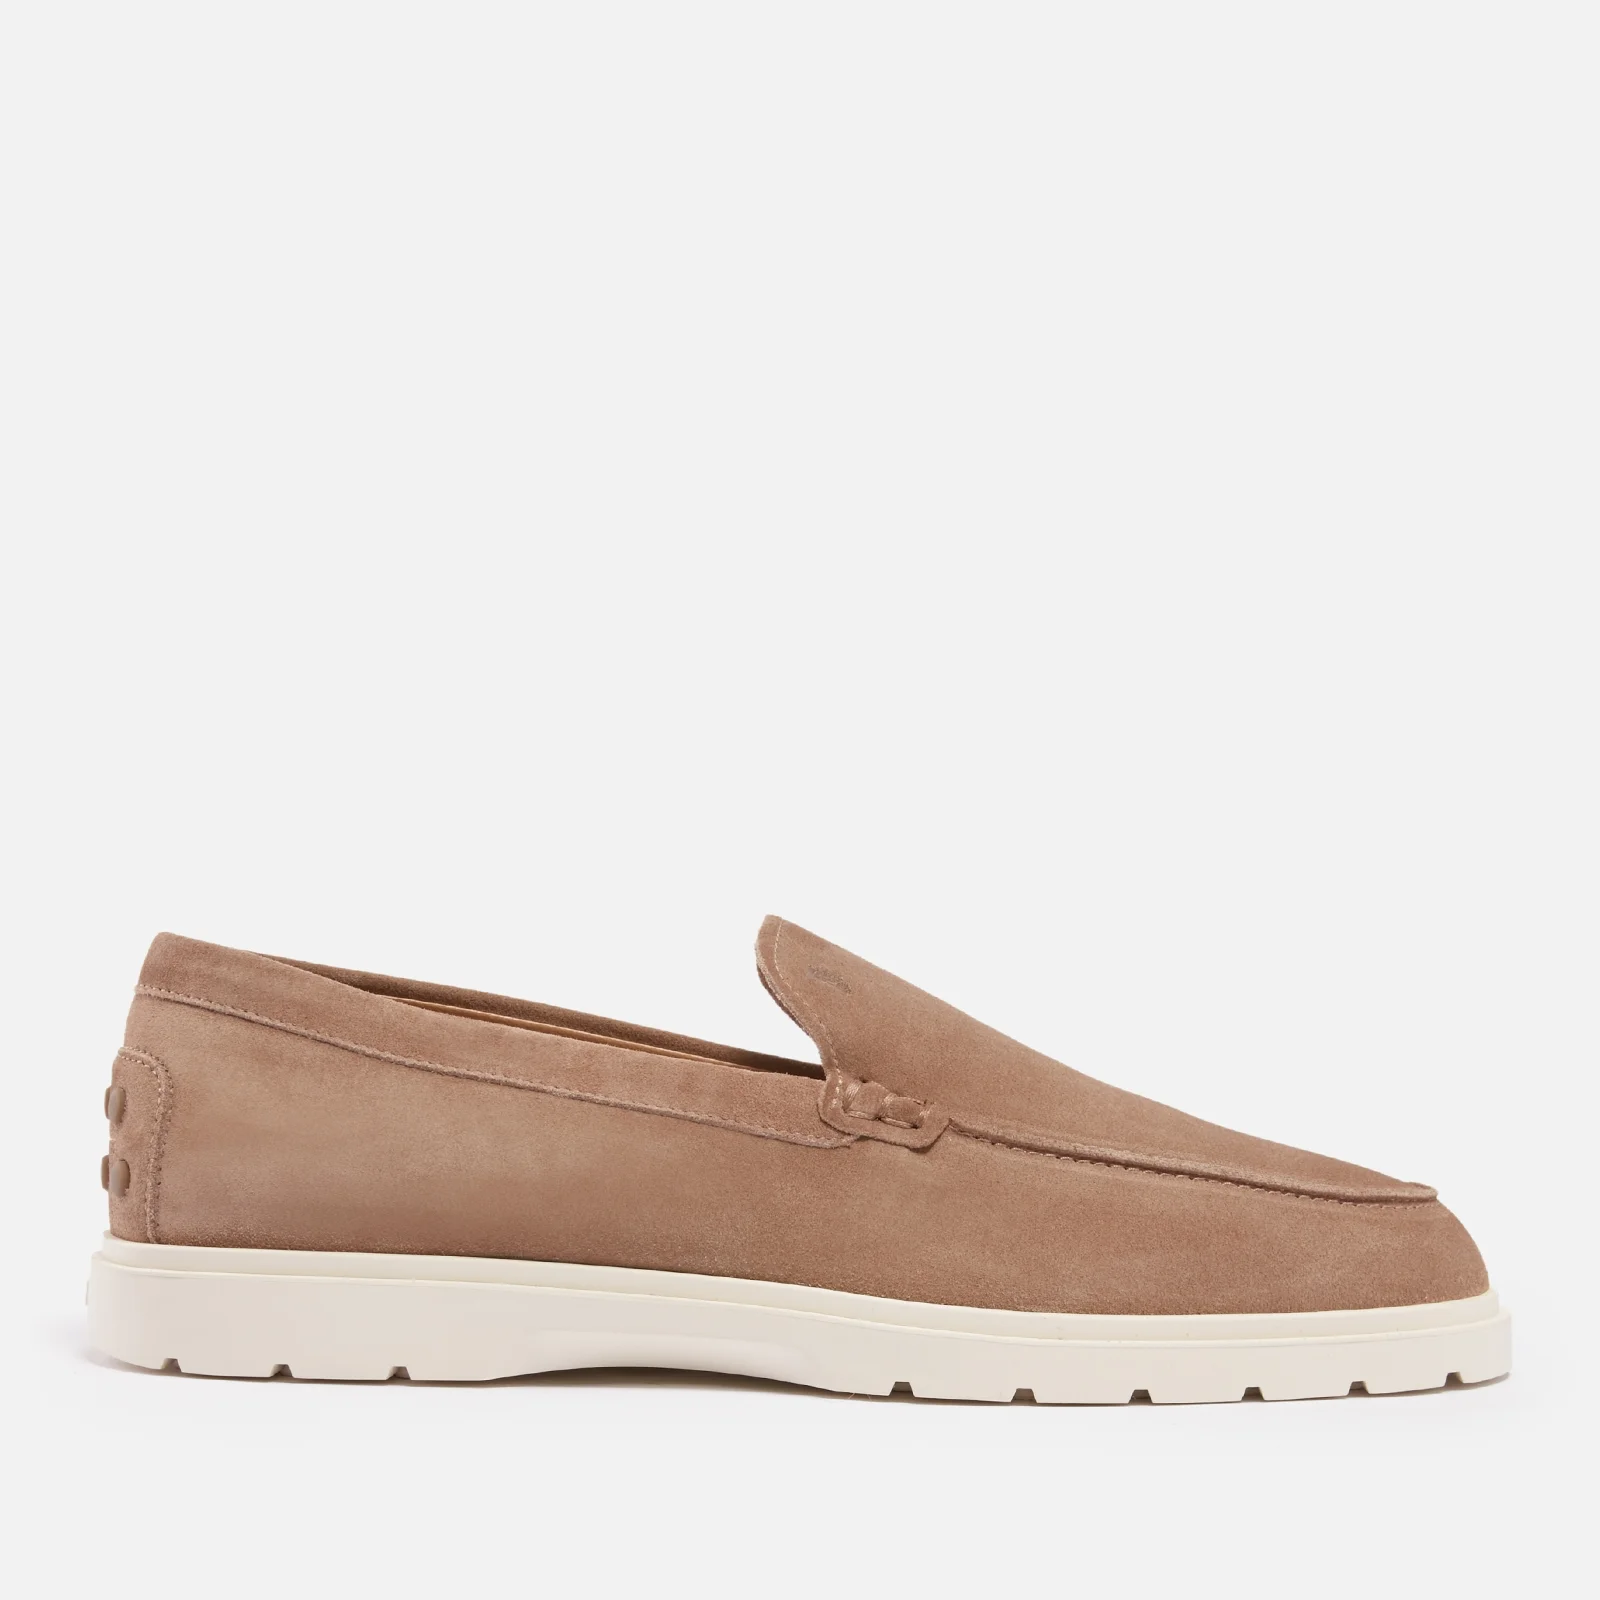 Tod's Men's Suede Slip-On Loafers Image 1